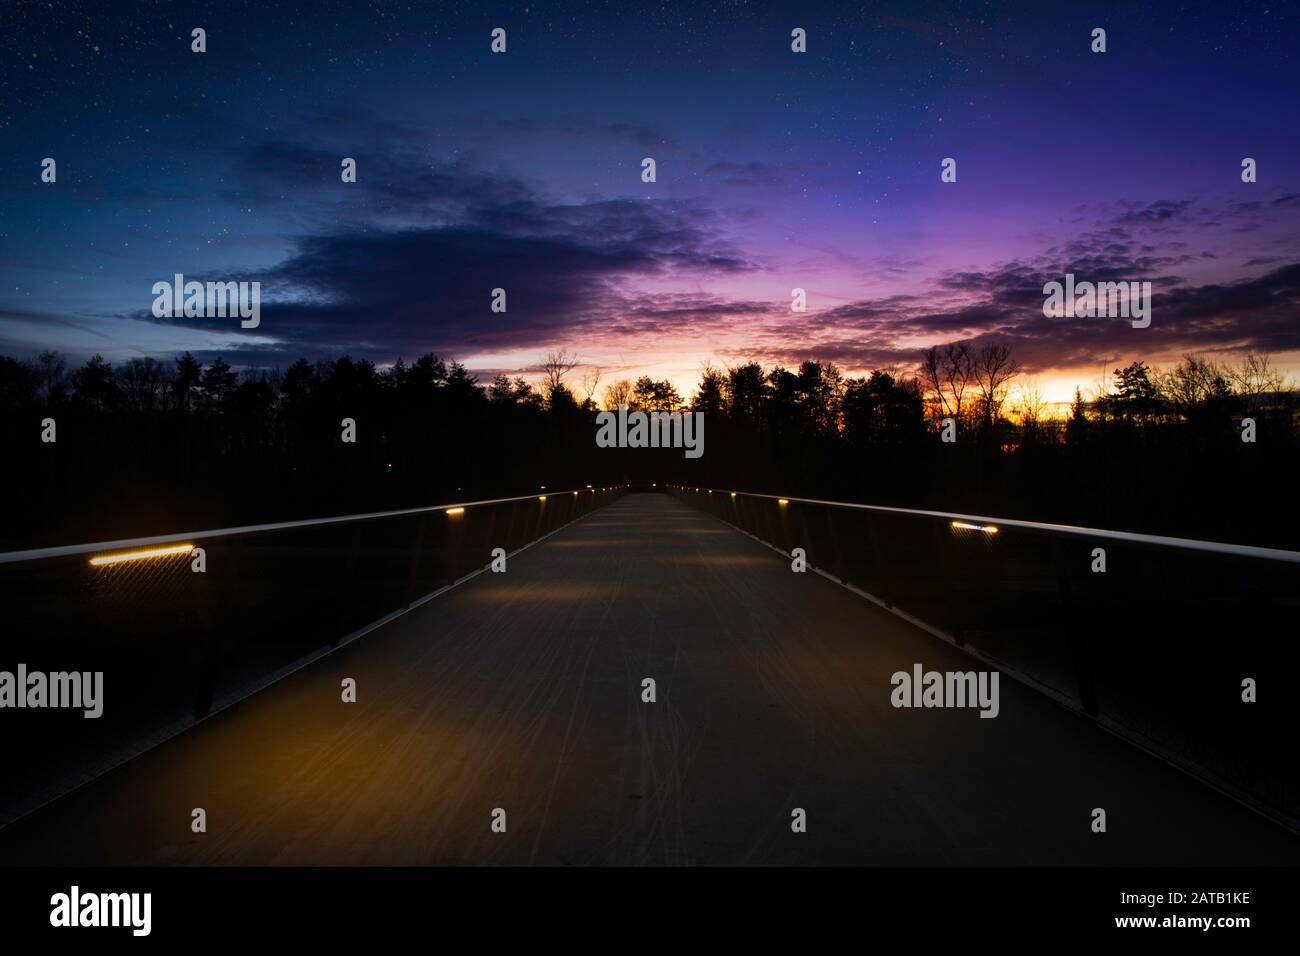 Bicycle bridge at night with starry sky and warm autumn colors Stock Photo